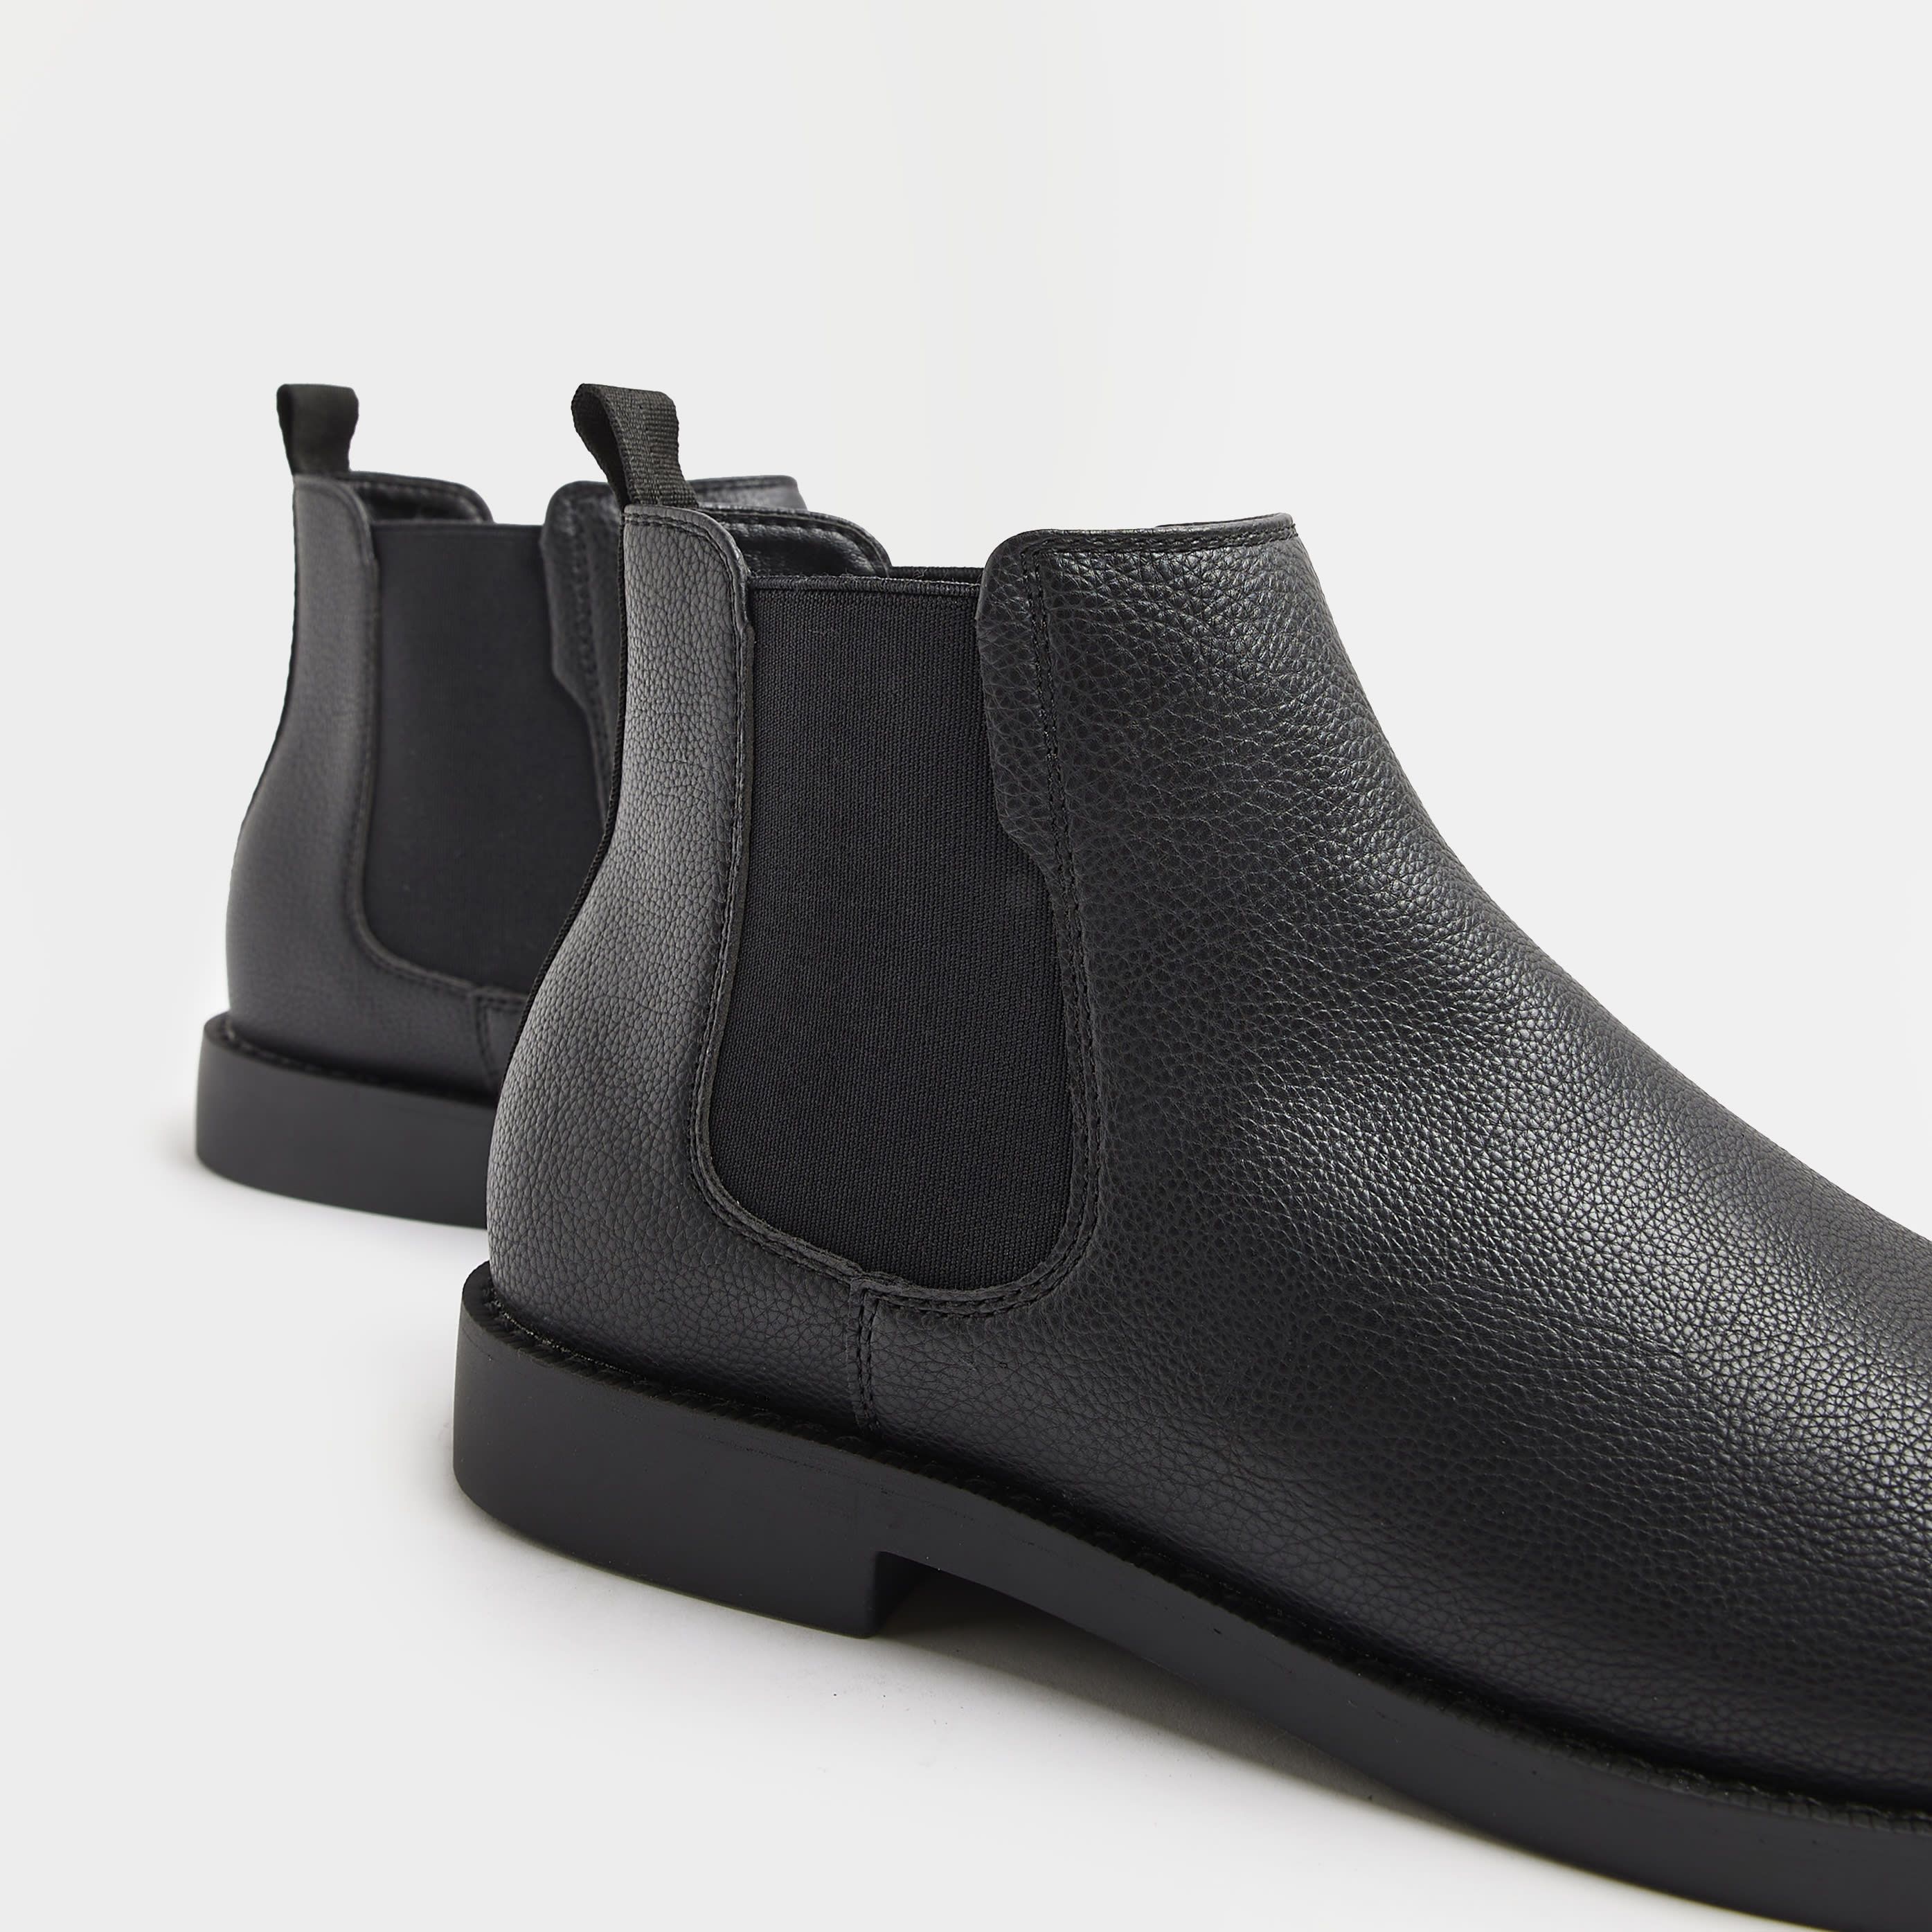 > Brand: River Island> Department: Men> Upper Material: PU> Material Composition: Upper: PU, Sole: Rubber> Type: Boot> Style: Chelsea> Occasion: Casual> Season: AW22> Pattern: No Pattern> Closure: Slip On> Toe Shape: Round Toe> Shoe Shaft Style: Ankle> Shoe Width: E